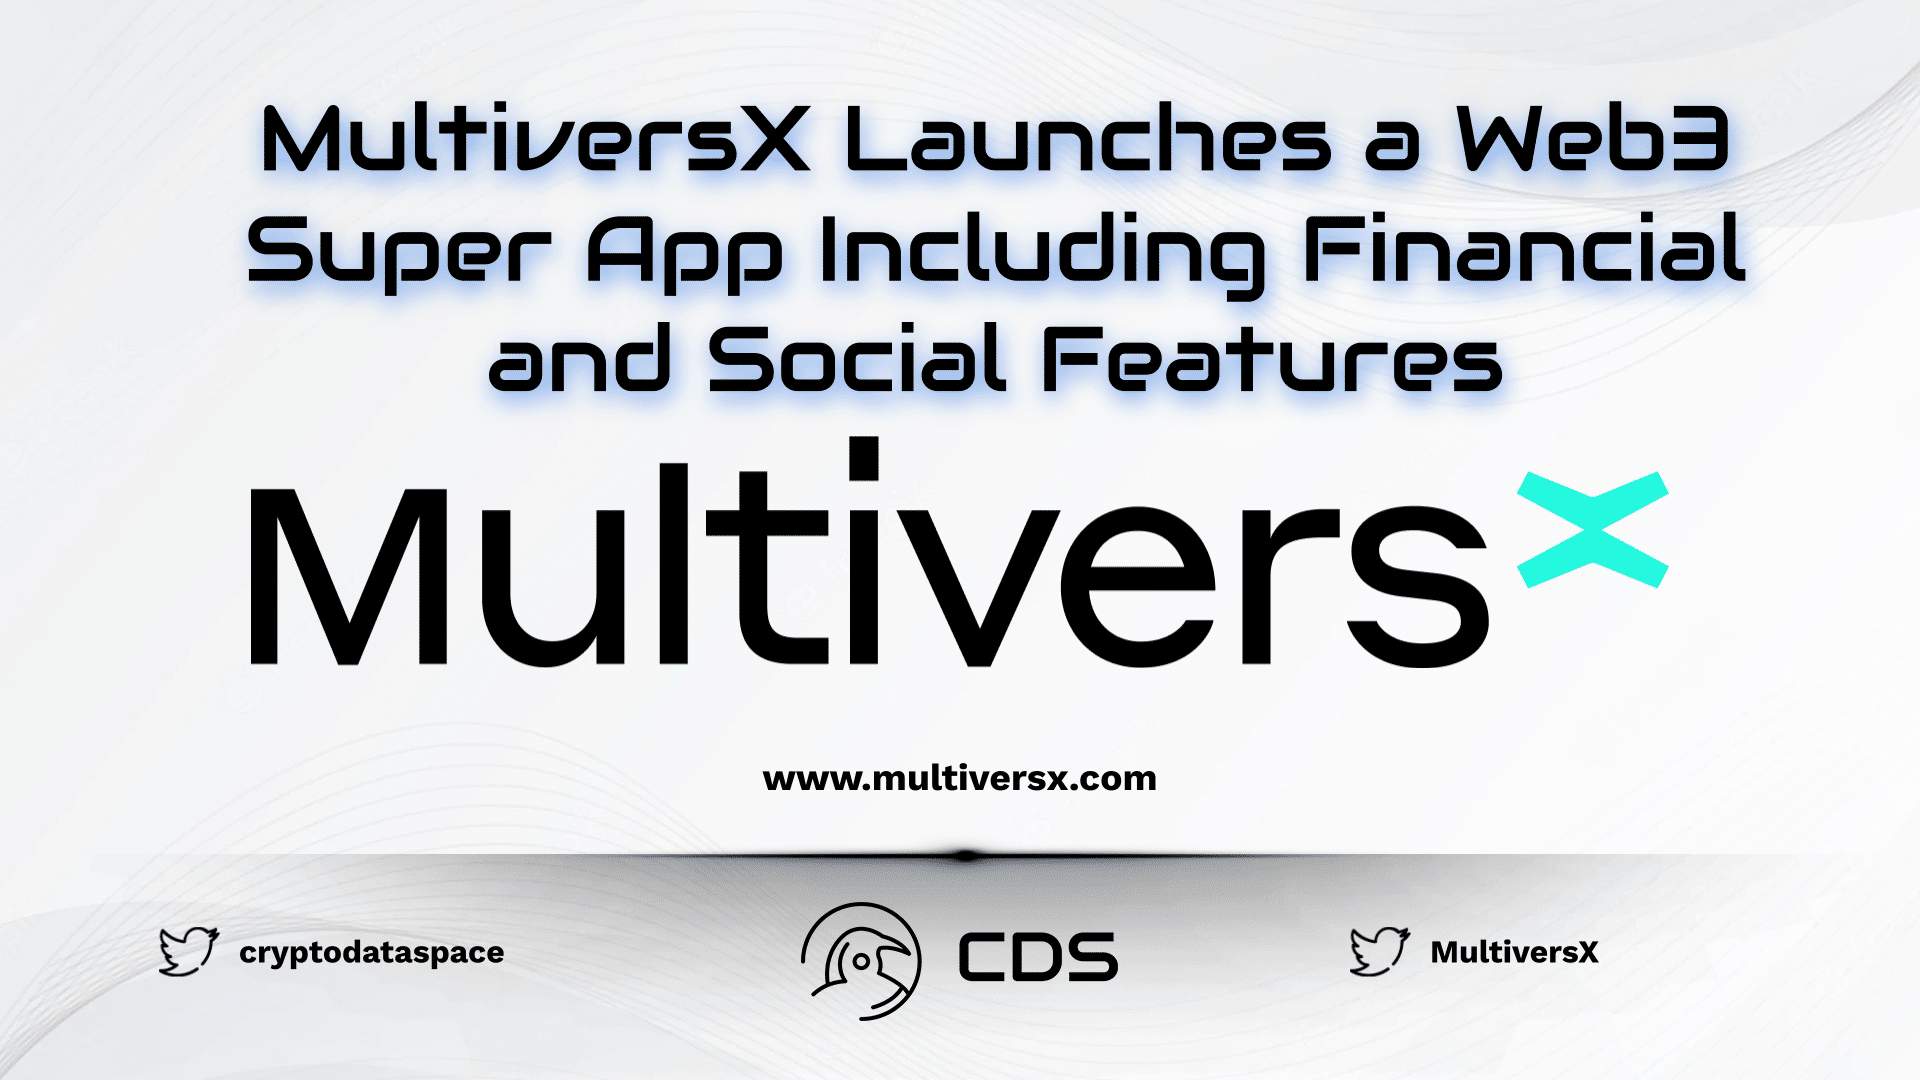 MultiversX Launches a Web3 Super App Including Financial and Social Features